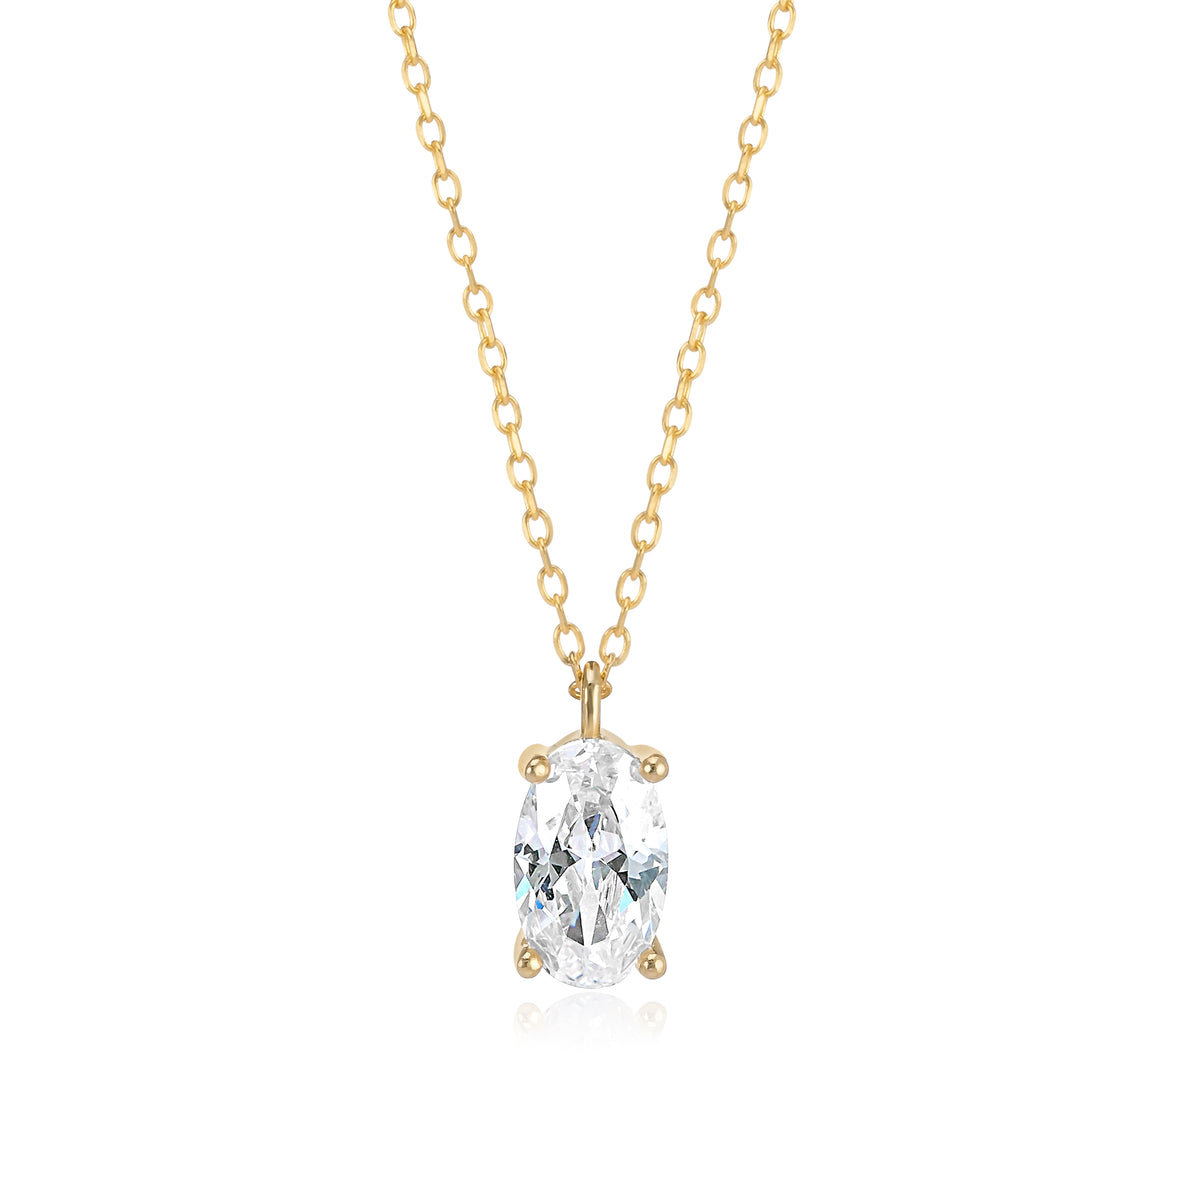 Oval Solitaire Pendant Necklace